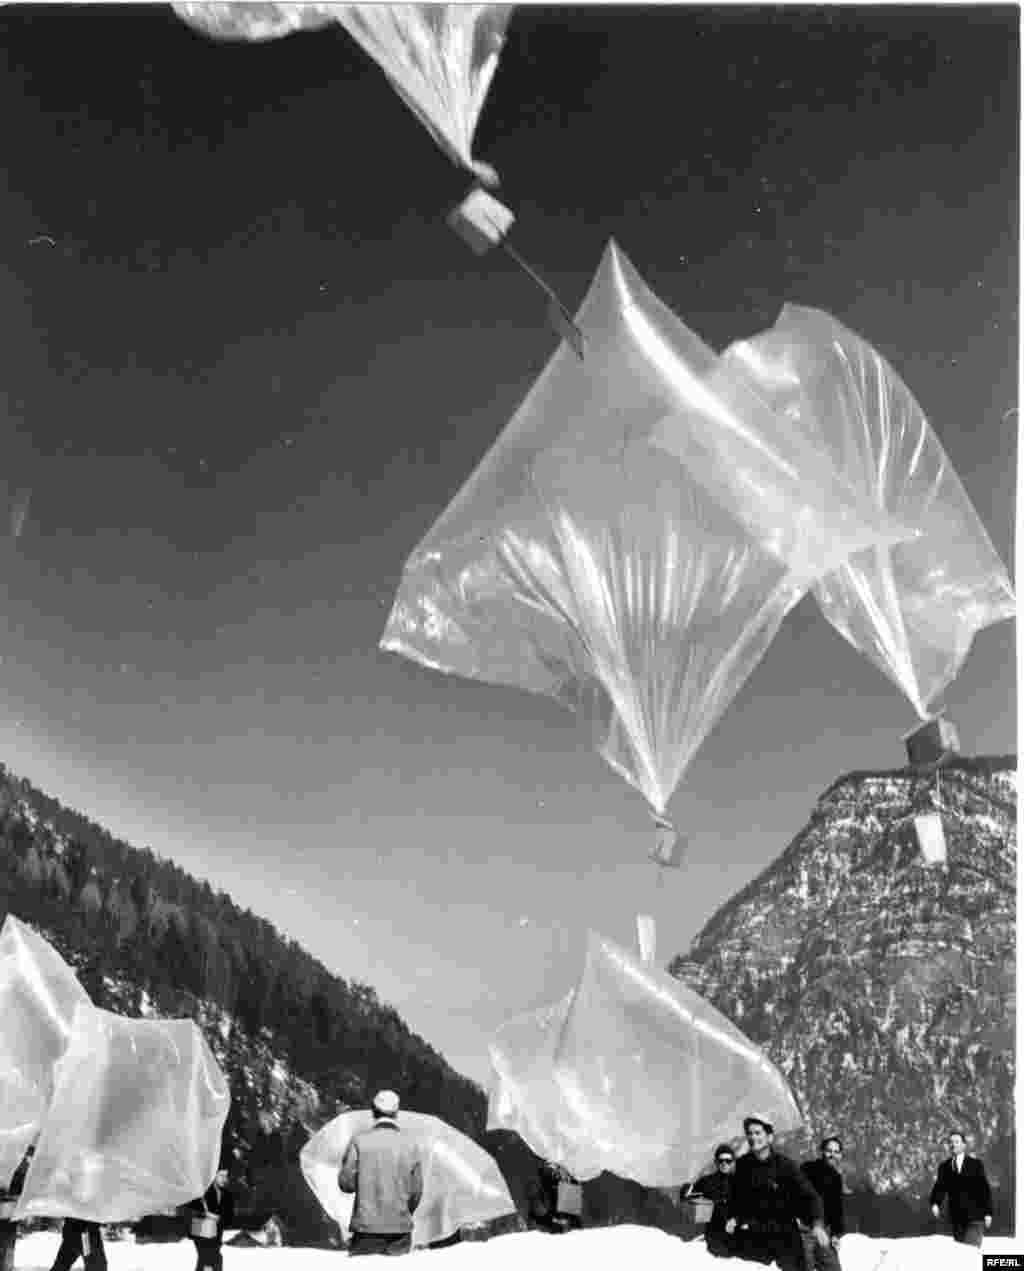 From 1953 to 1956 RFE floated balloons filled with news reports over the Iron Curtain.